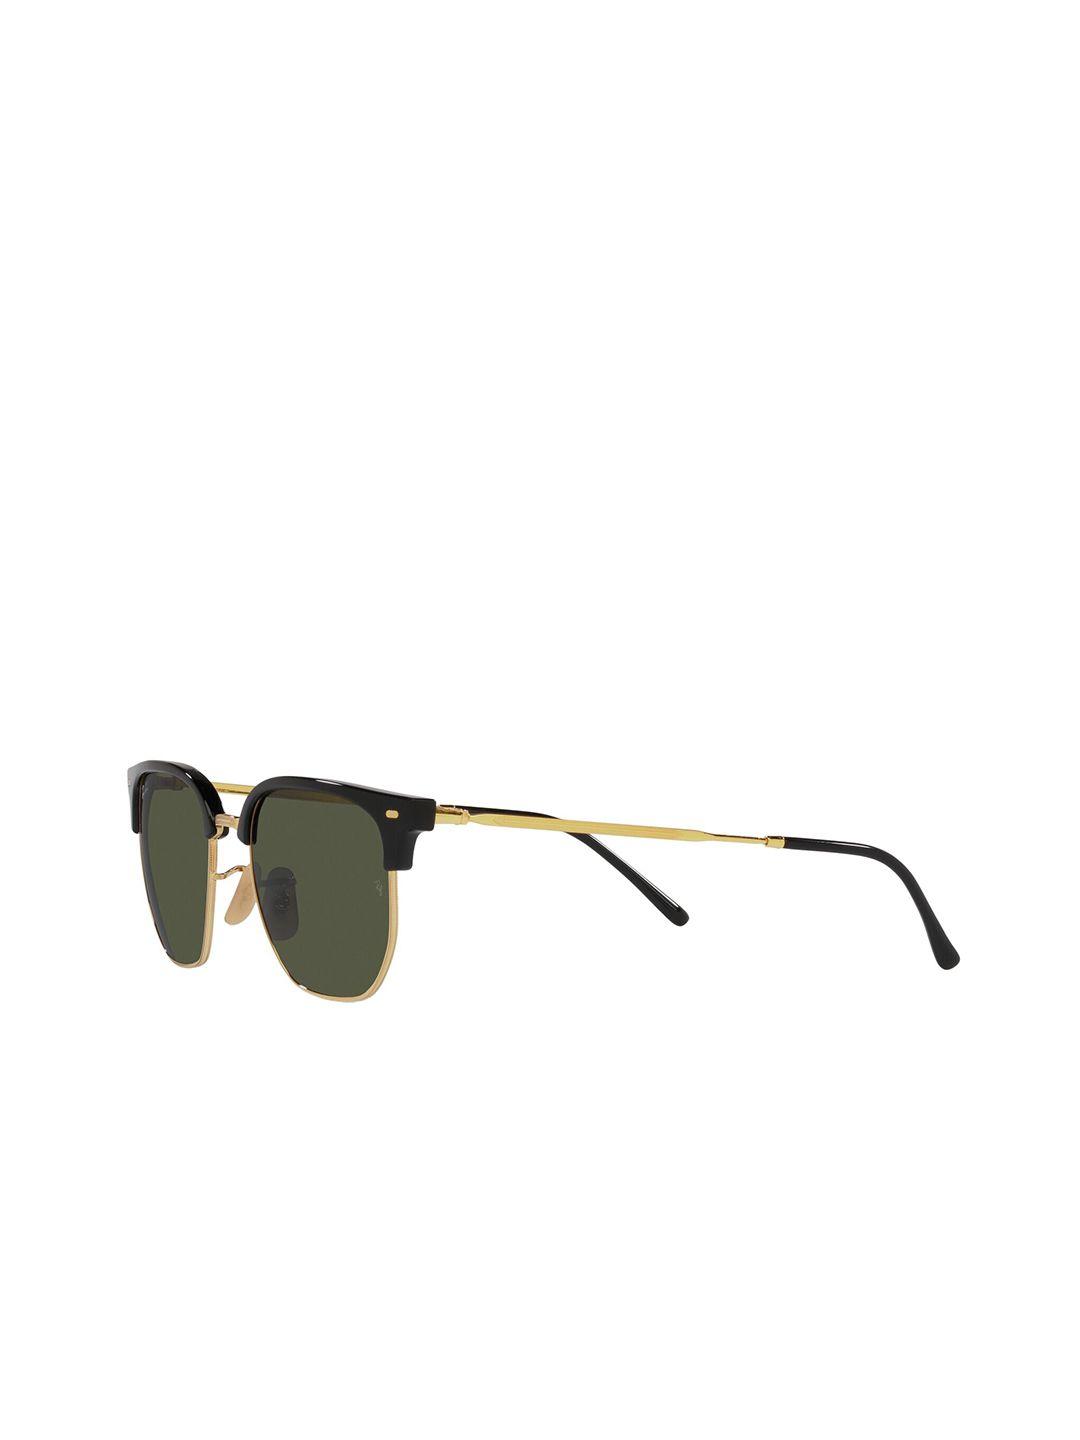 ray-ban unisex oversized sunglasses with uv protected lens